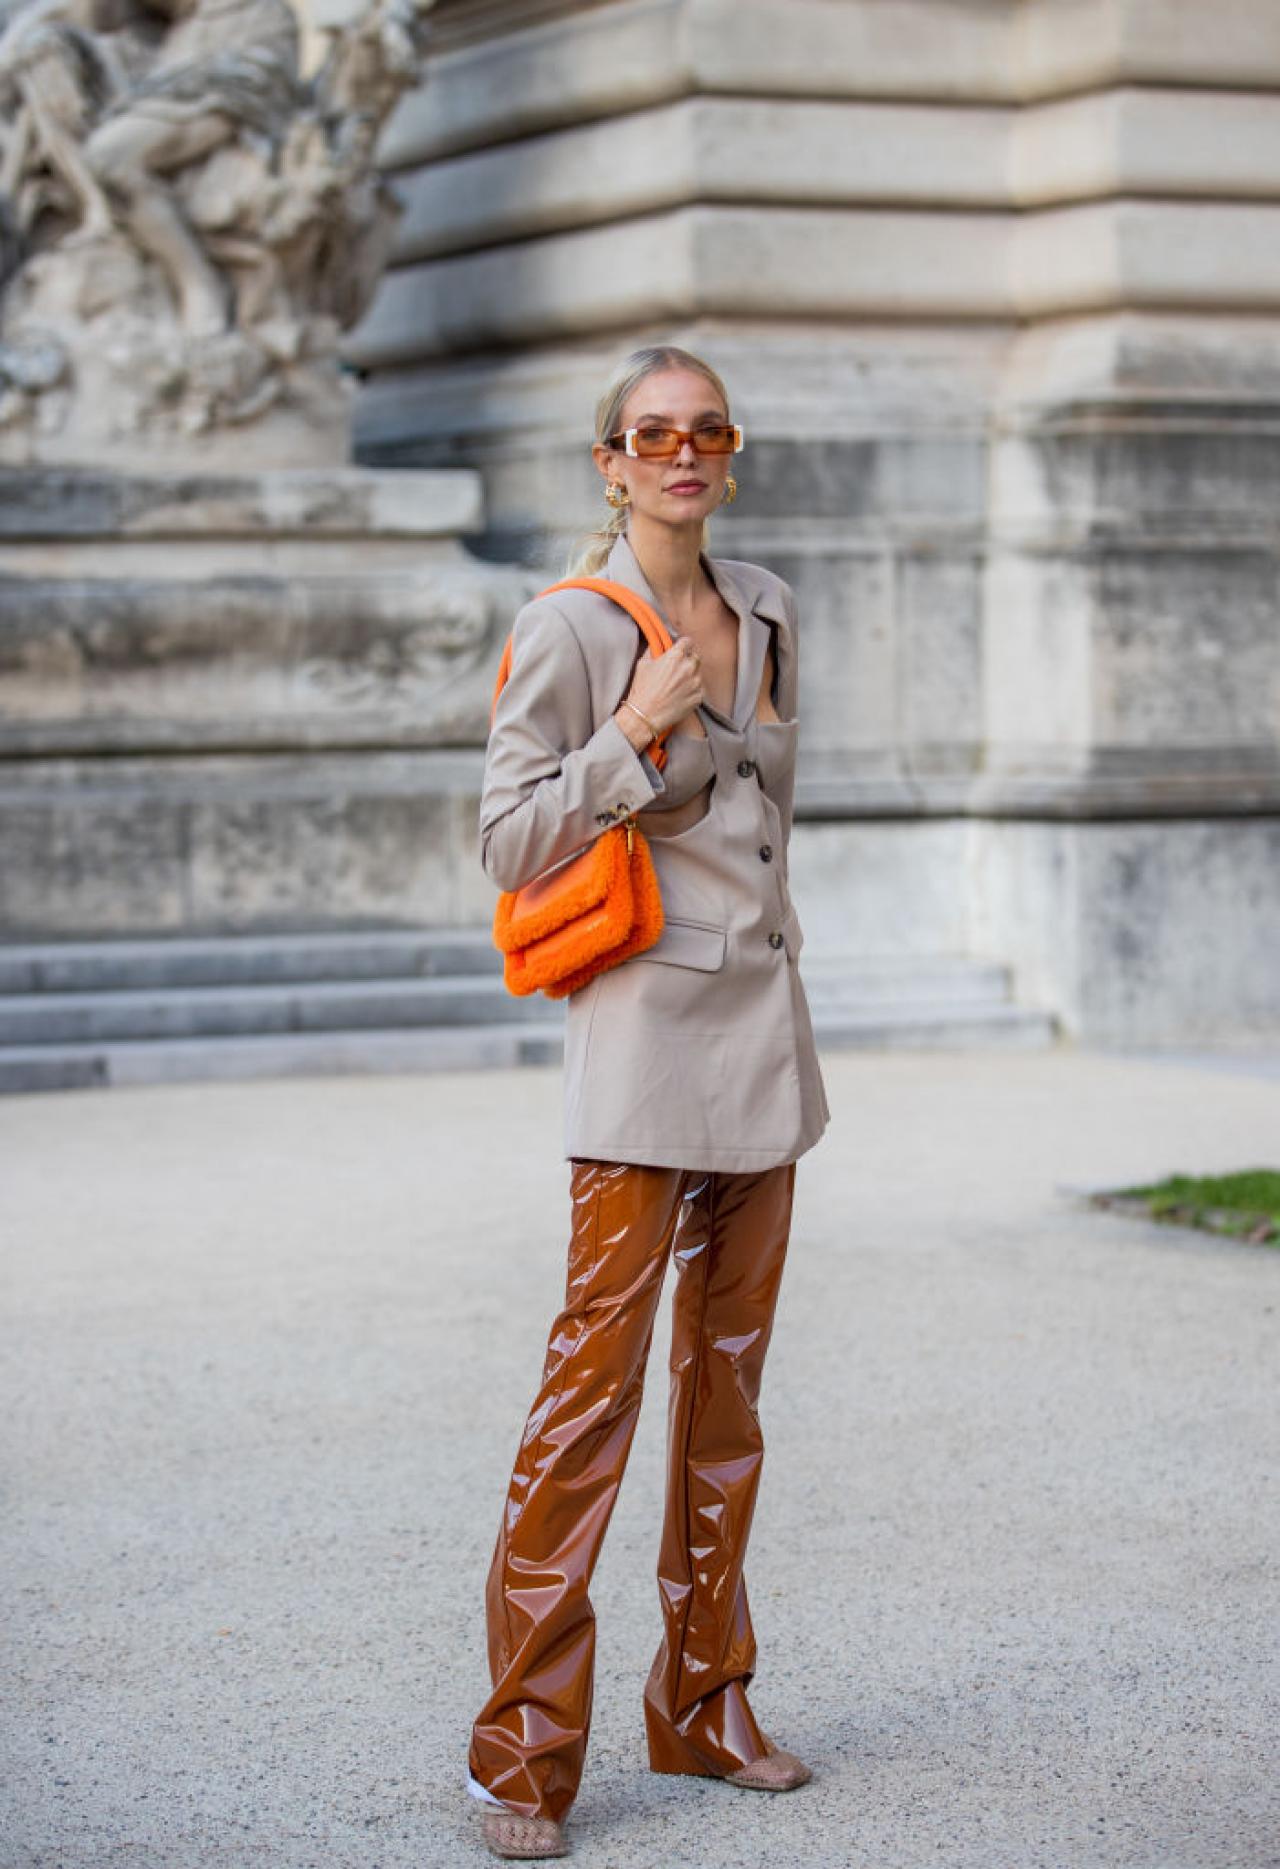 PARIS, FRANCE - SEPTEMBER 30: Leonie Hanne seen wearing ripped blazer, orange bag, brown pants outside rokh during Paris Fashion Week - Womenswear Spring Summer 2022 on September 30, 2021 in Paris, France. (Photo by Christian Vierig/Getty Images)